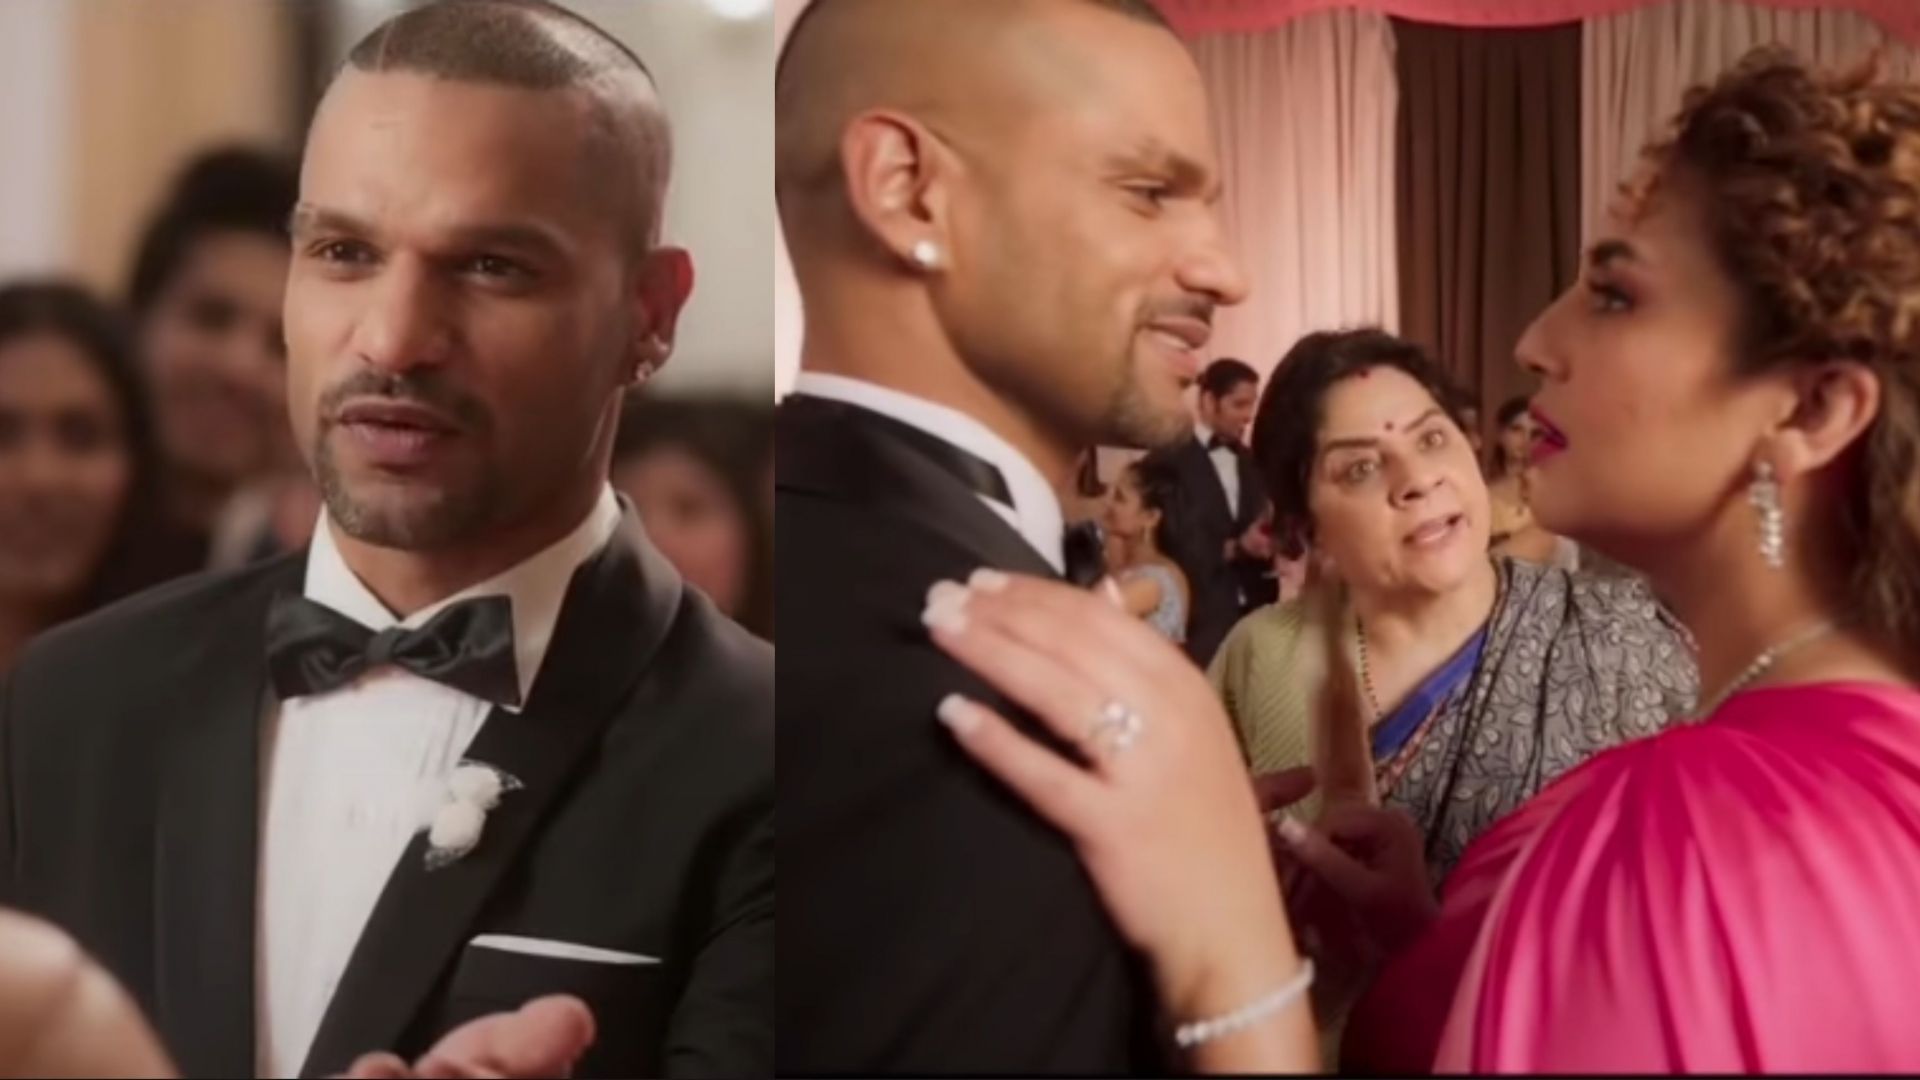 Shikhar Dhawan will make a guest appearance in the movie 